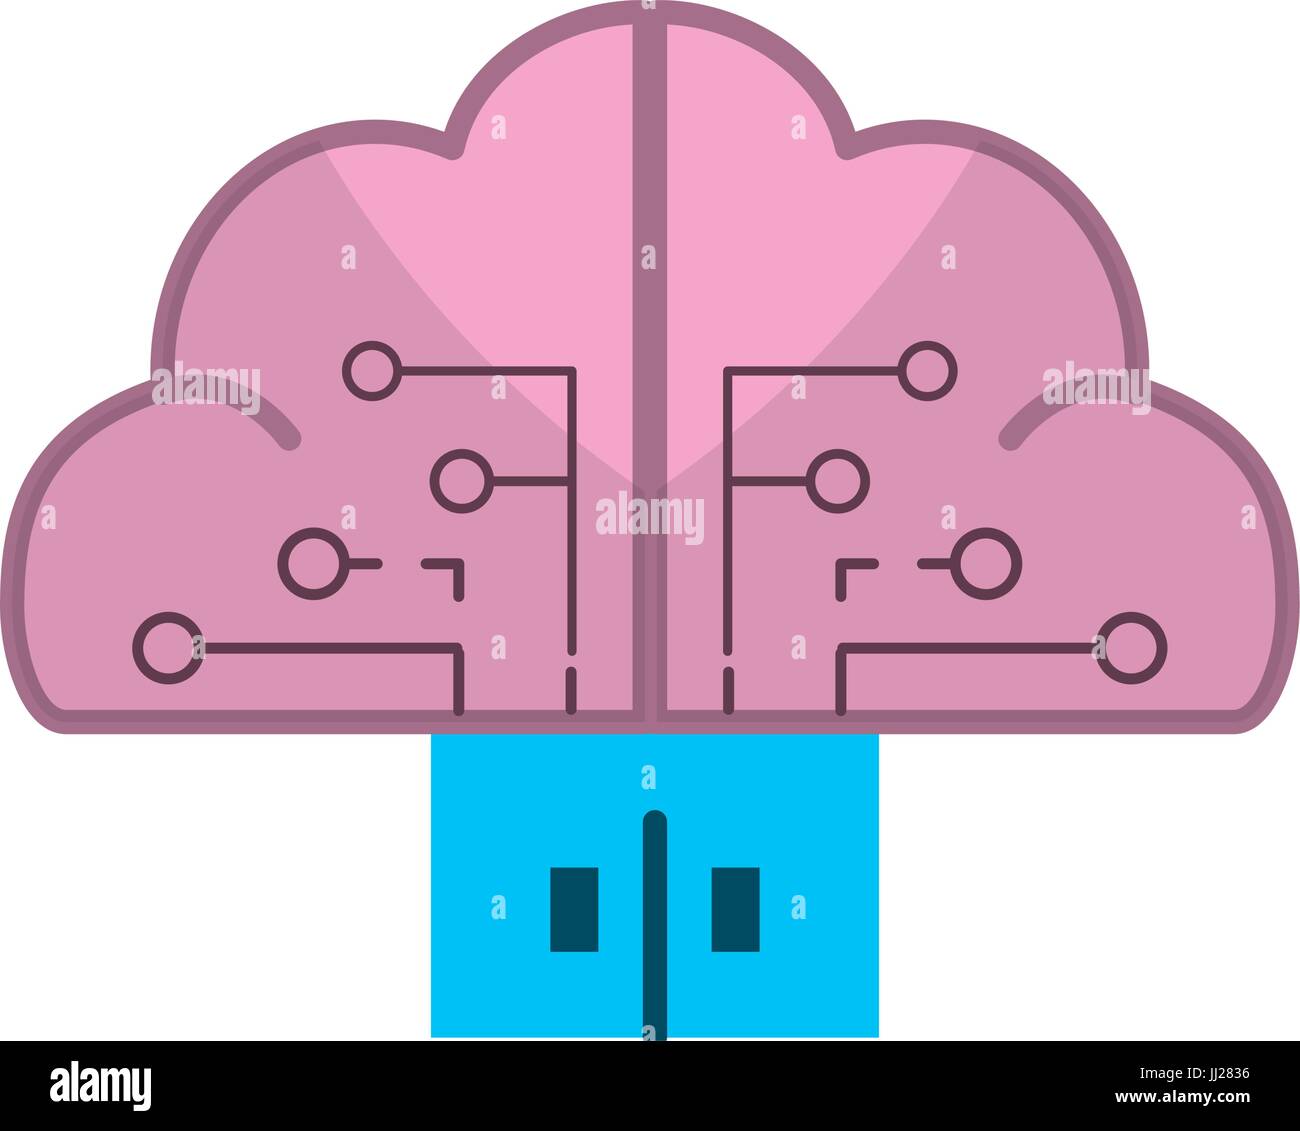 brain cloud data with circuits and door connection Stock Vector